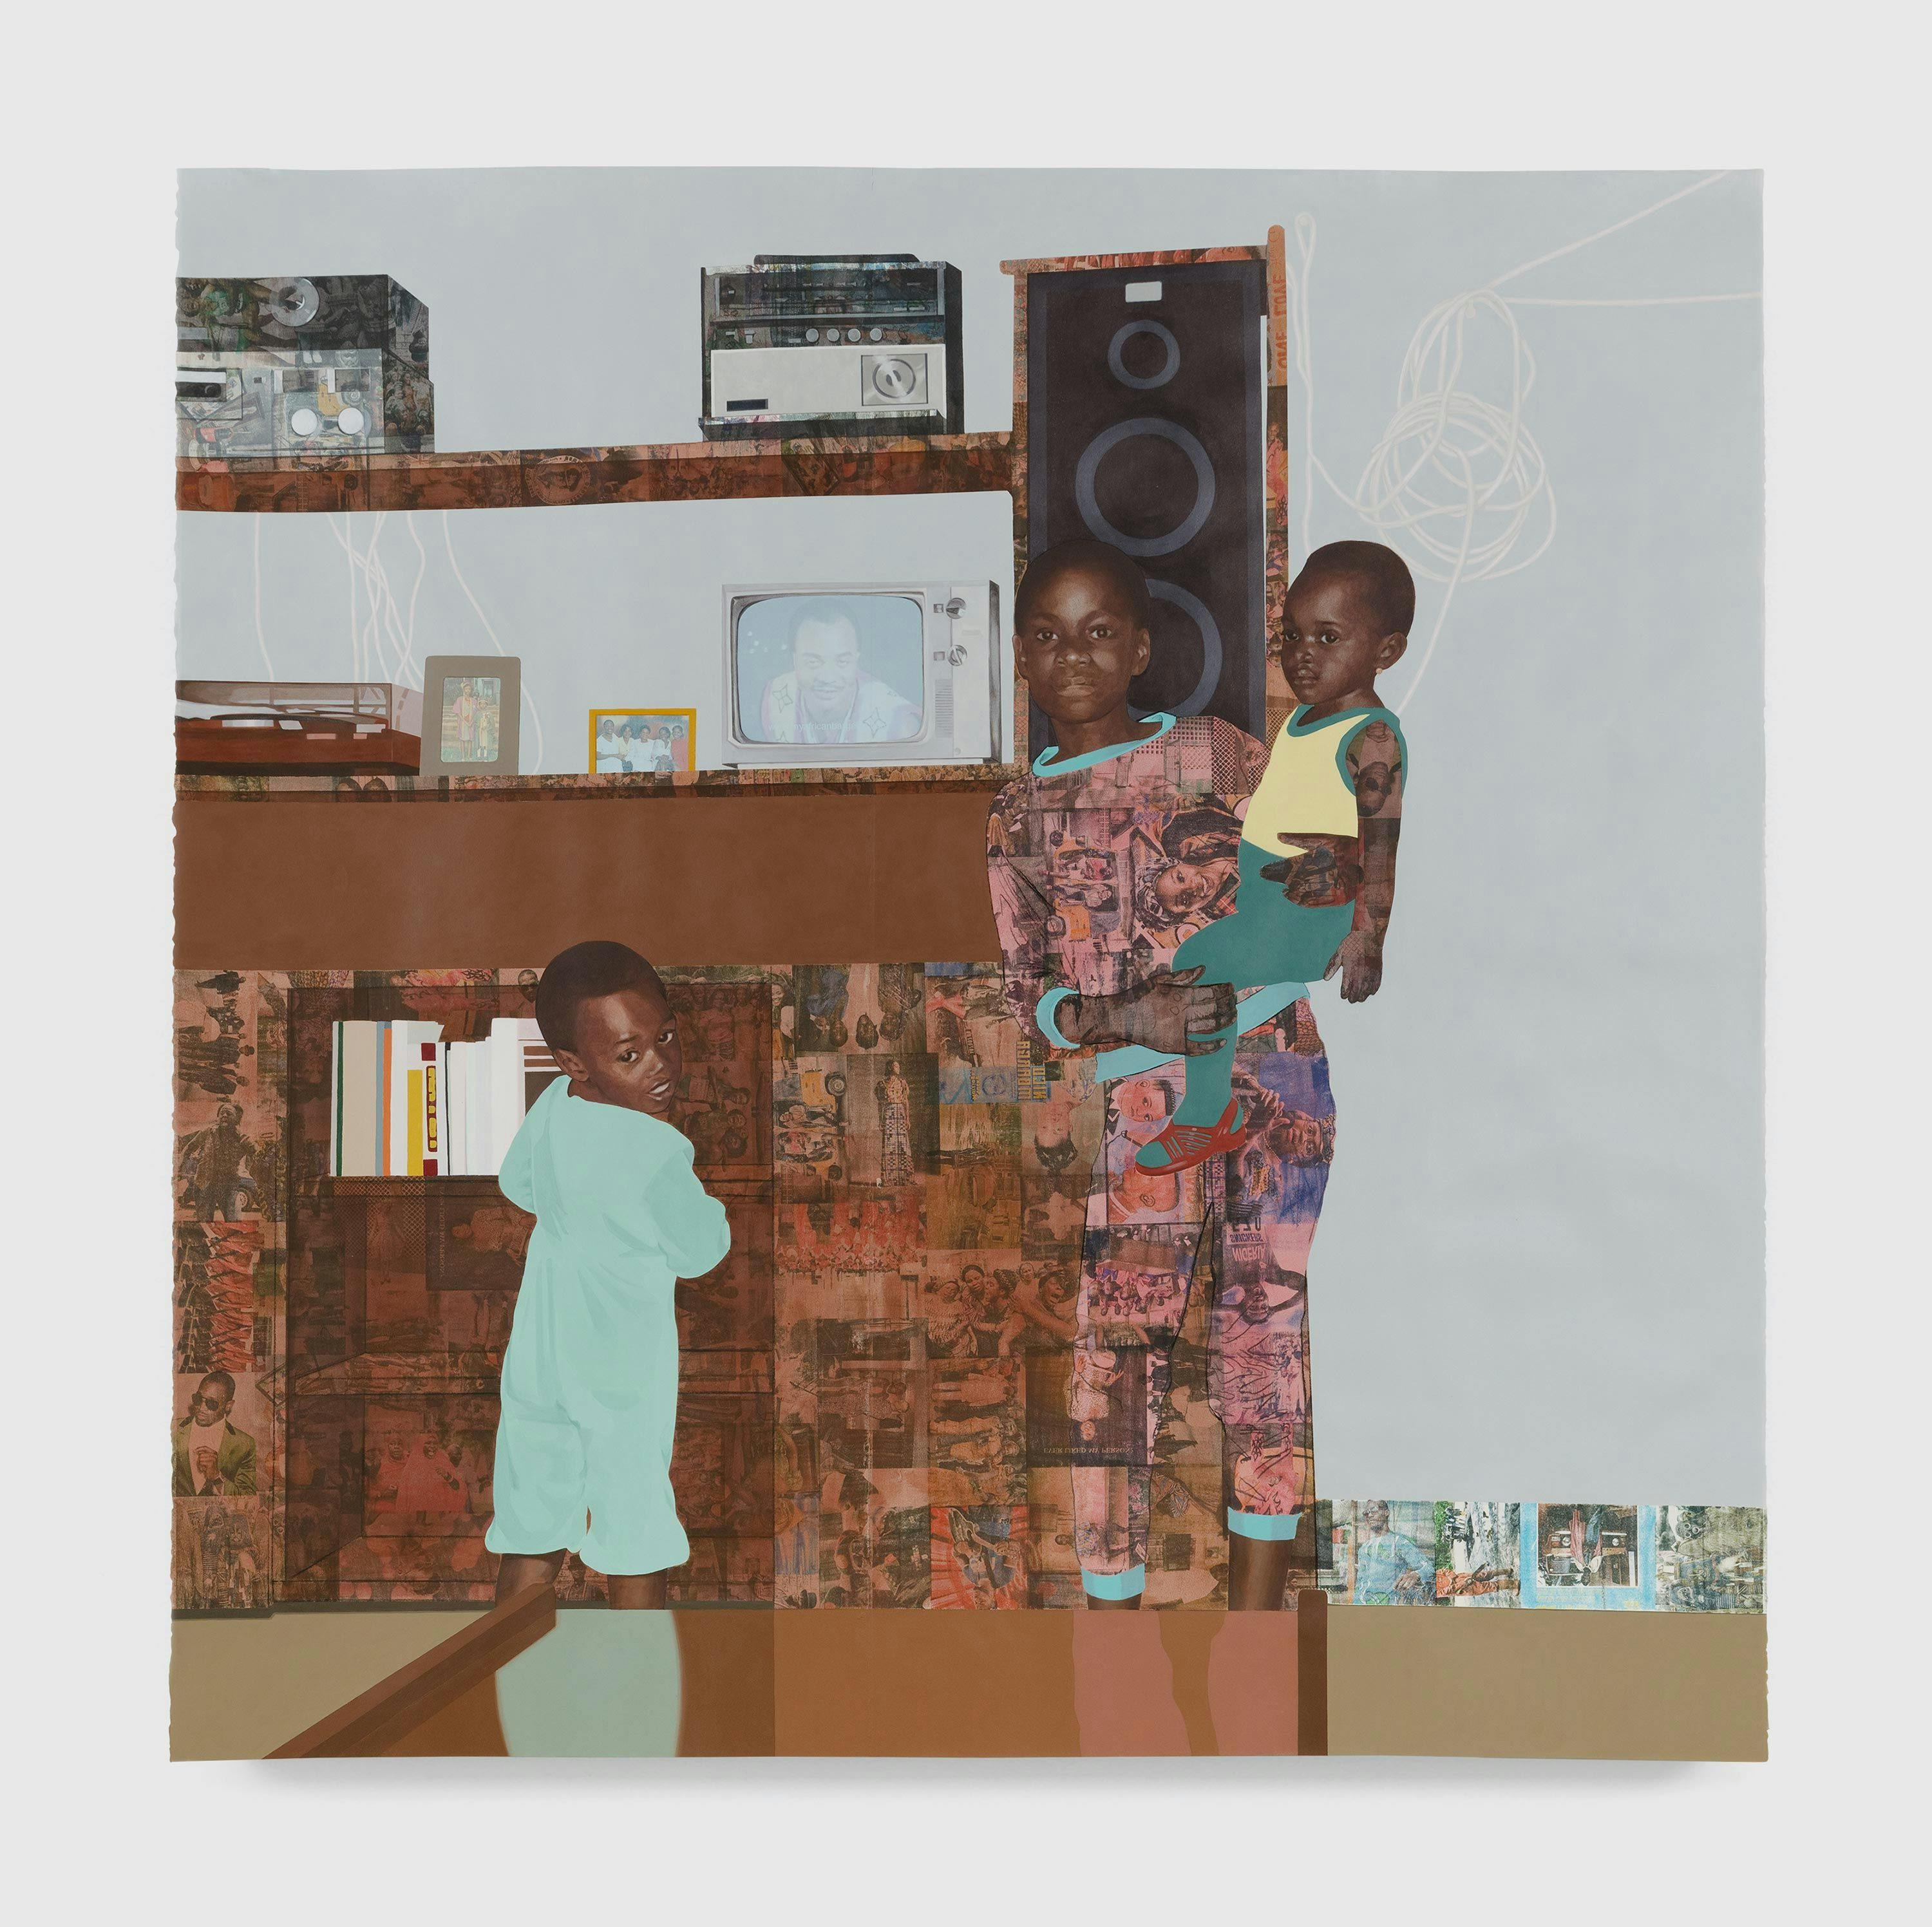 A work on paper by Njideka Akunyili Crosby, titled "The Beautyful Ones" Series #9, dated 2018.